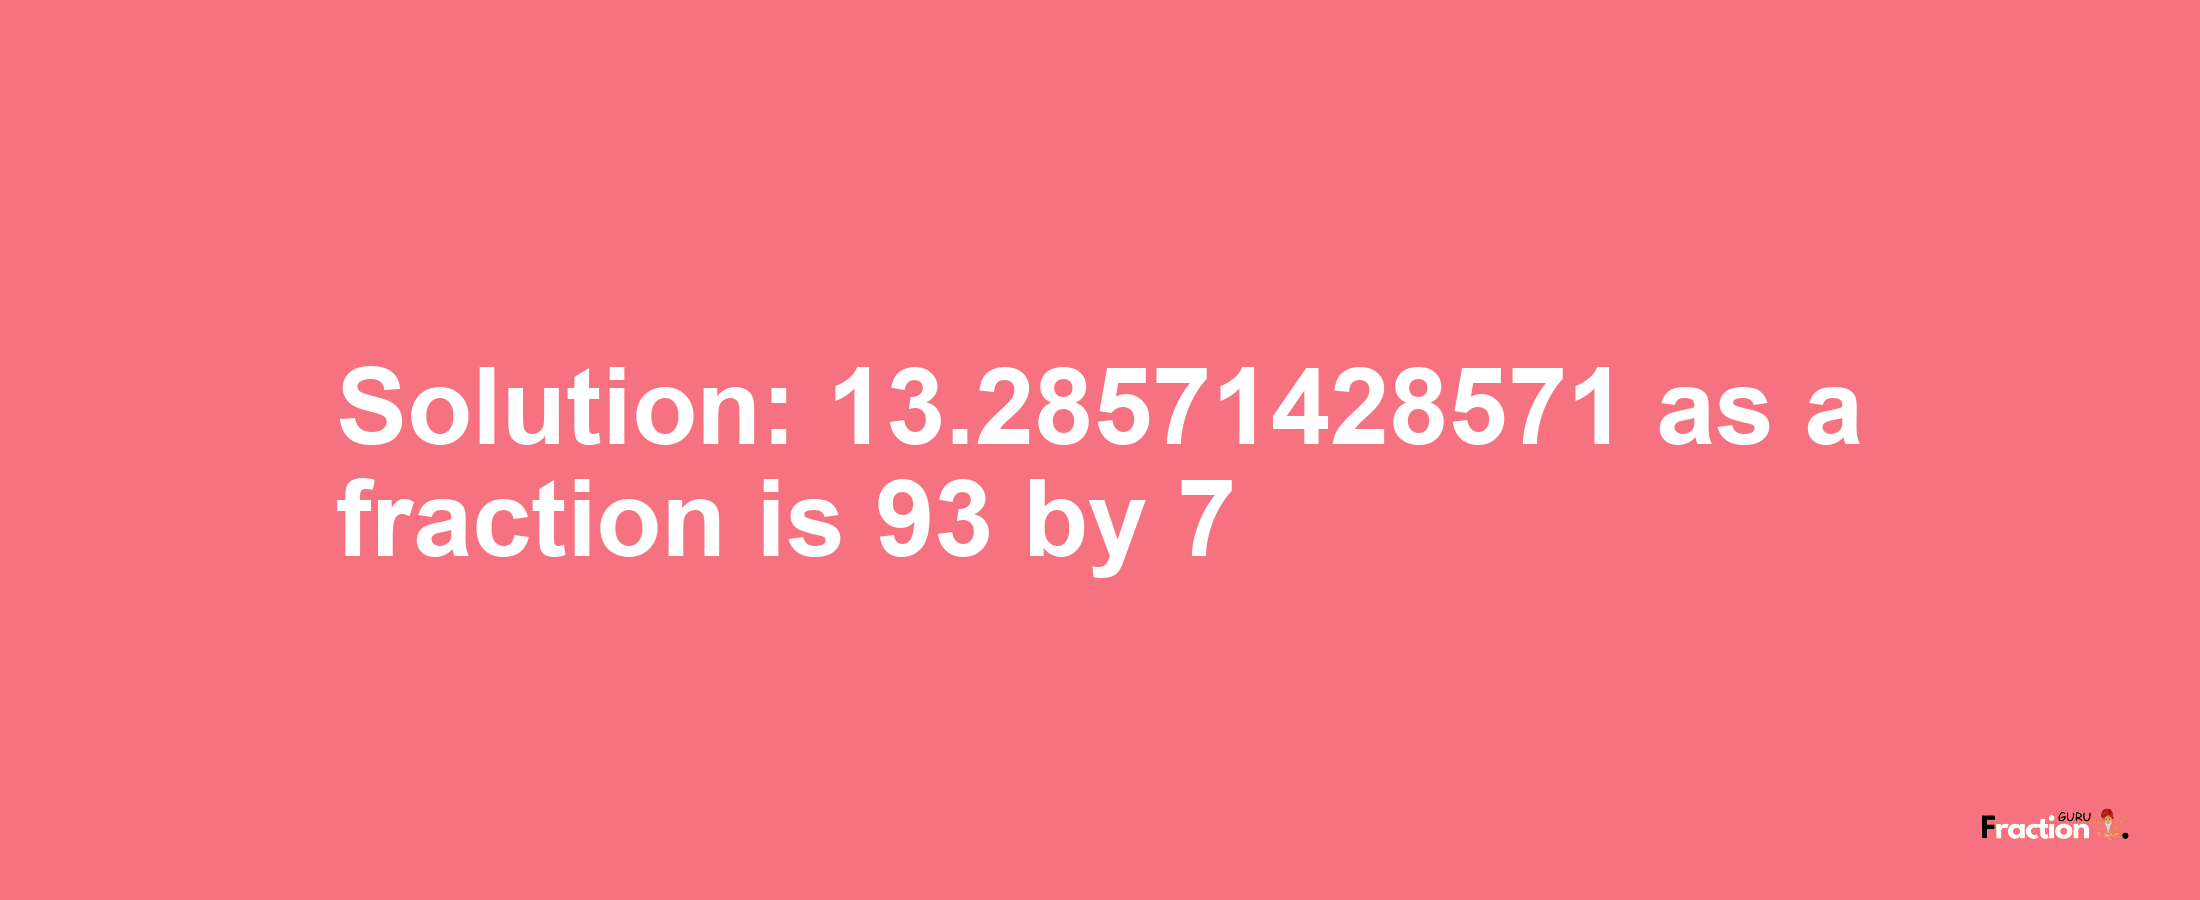 Solution:13.28571428571 as a fraction is 93/7